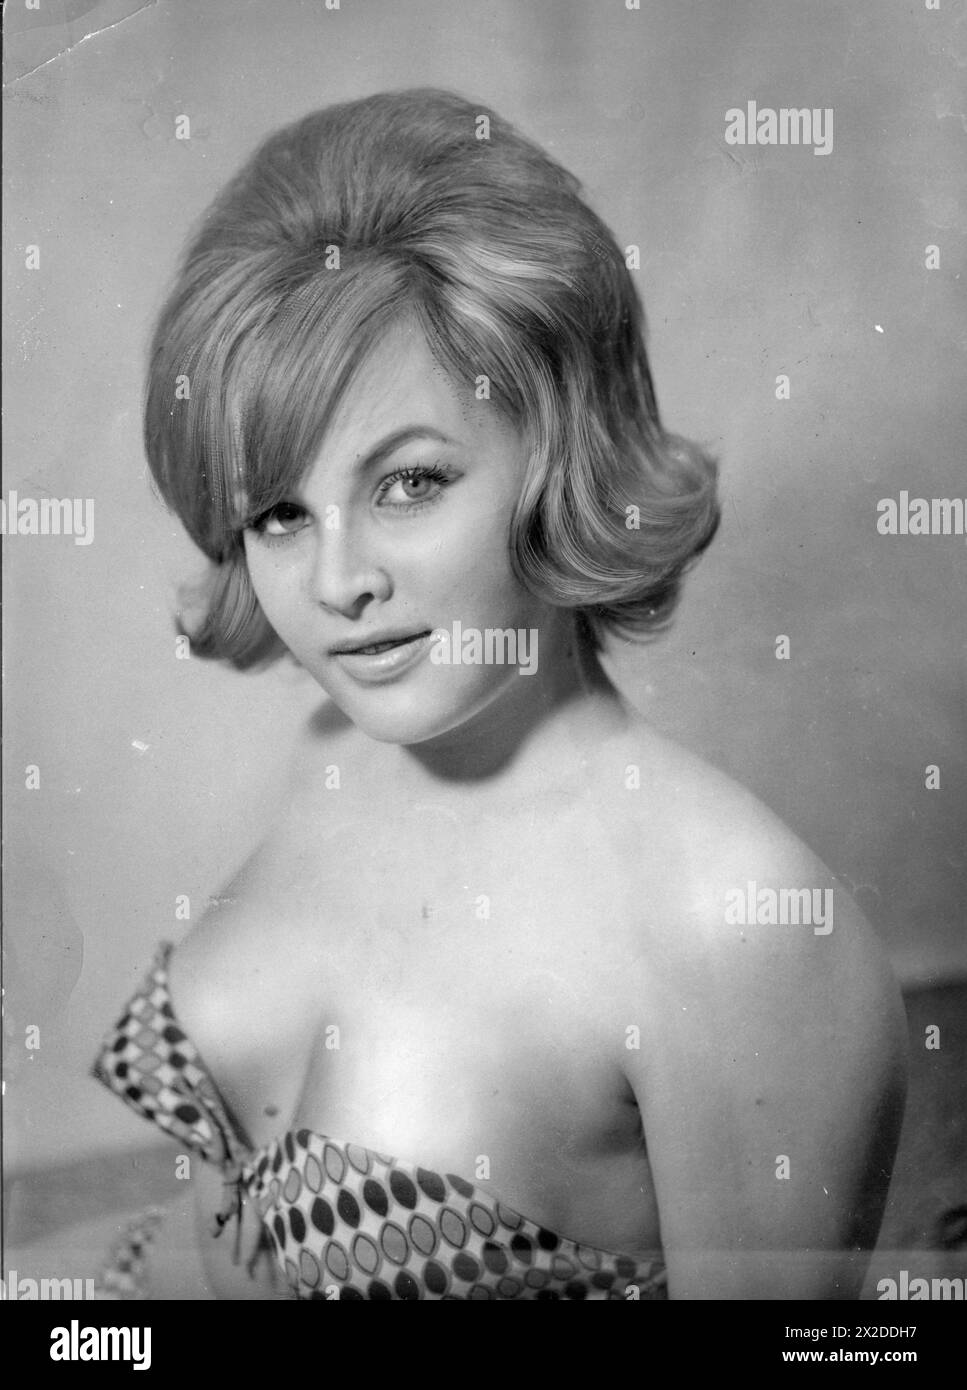 Wanninger, Christa, 1.12.1940 - 2.5.1963, German model and actress, early 1960s, ADDITIONAL-RIGHTS-CLEARANCE-INFO-NOT-AVAILABLE Stock Photo